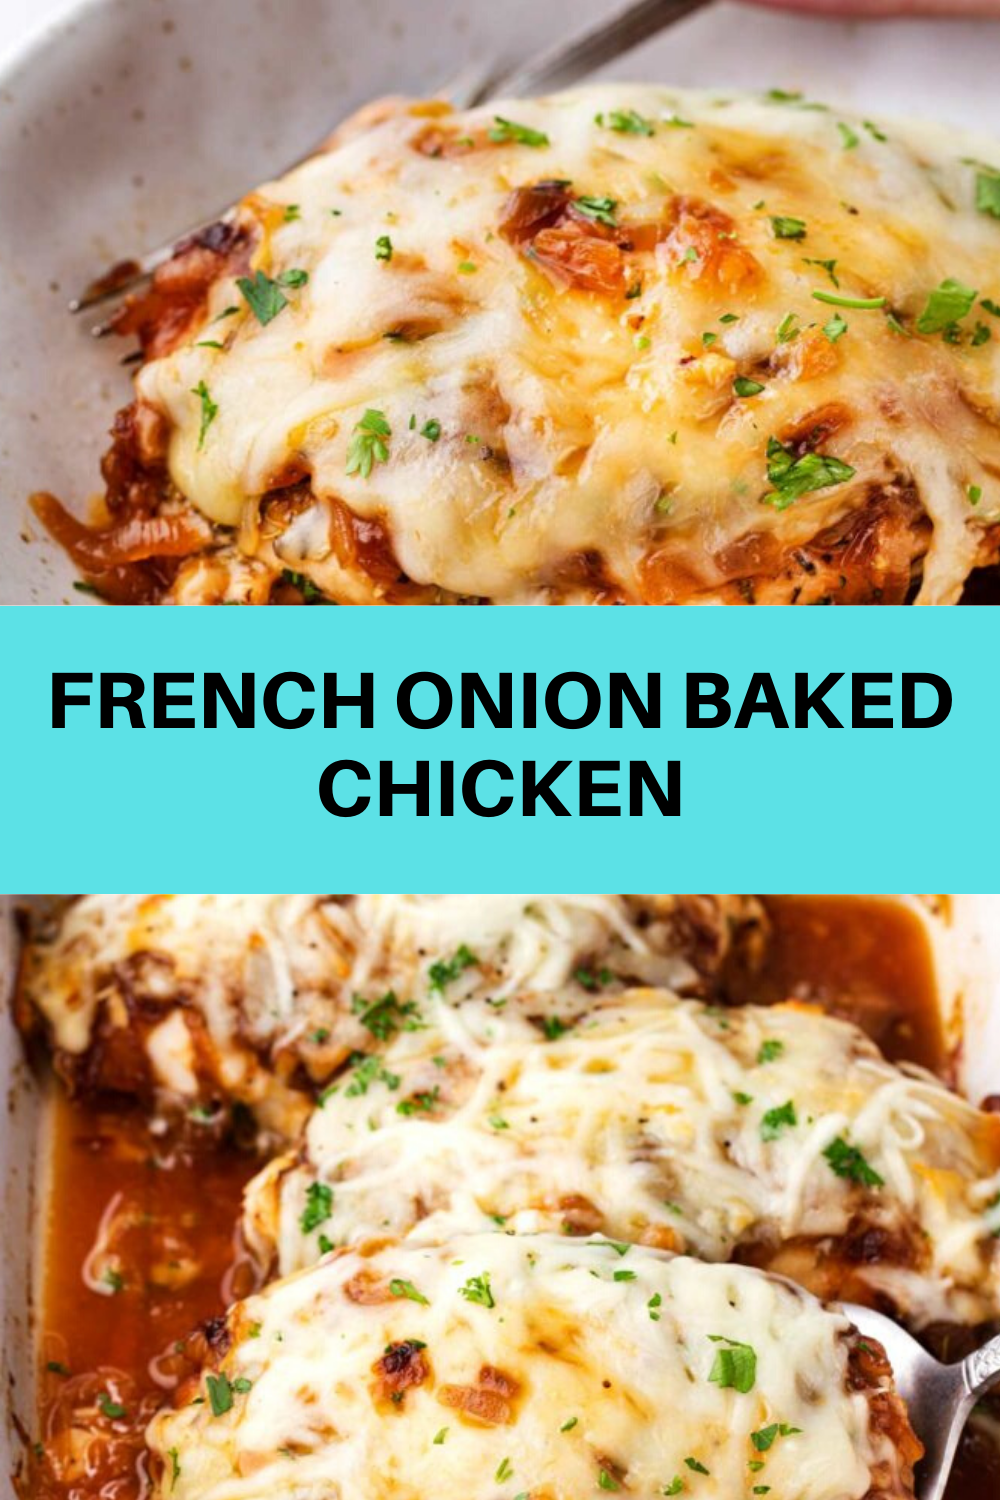 FRENCH ONION BAKED CHICKEN